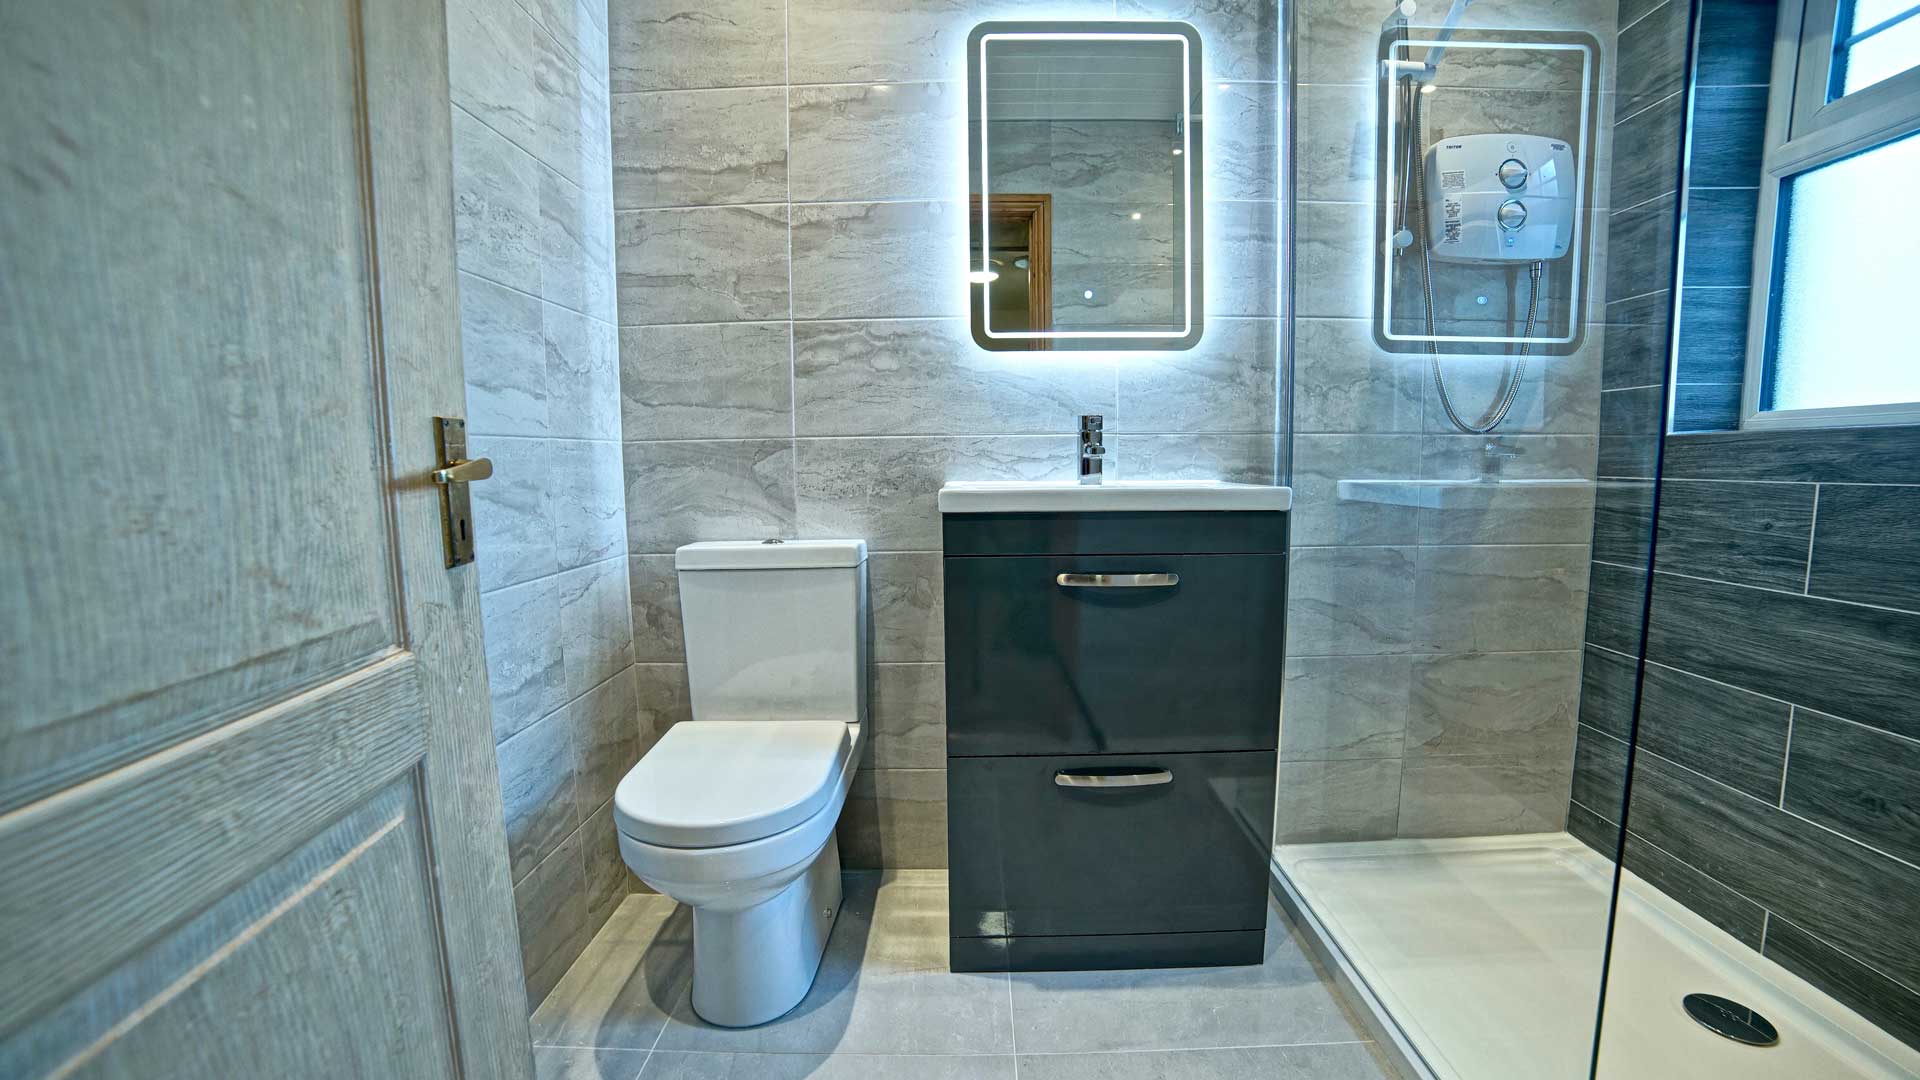 Affordable Luxury Bathrooms. Why Pay More for your Bathroom Renovation?